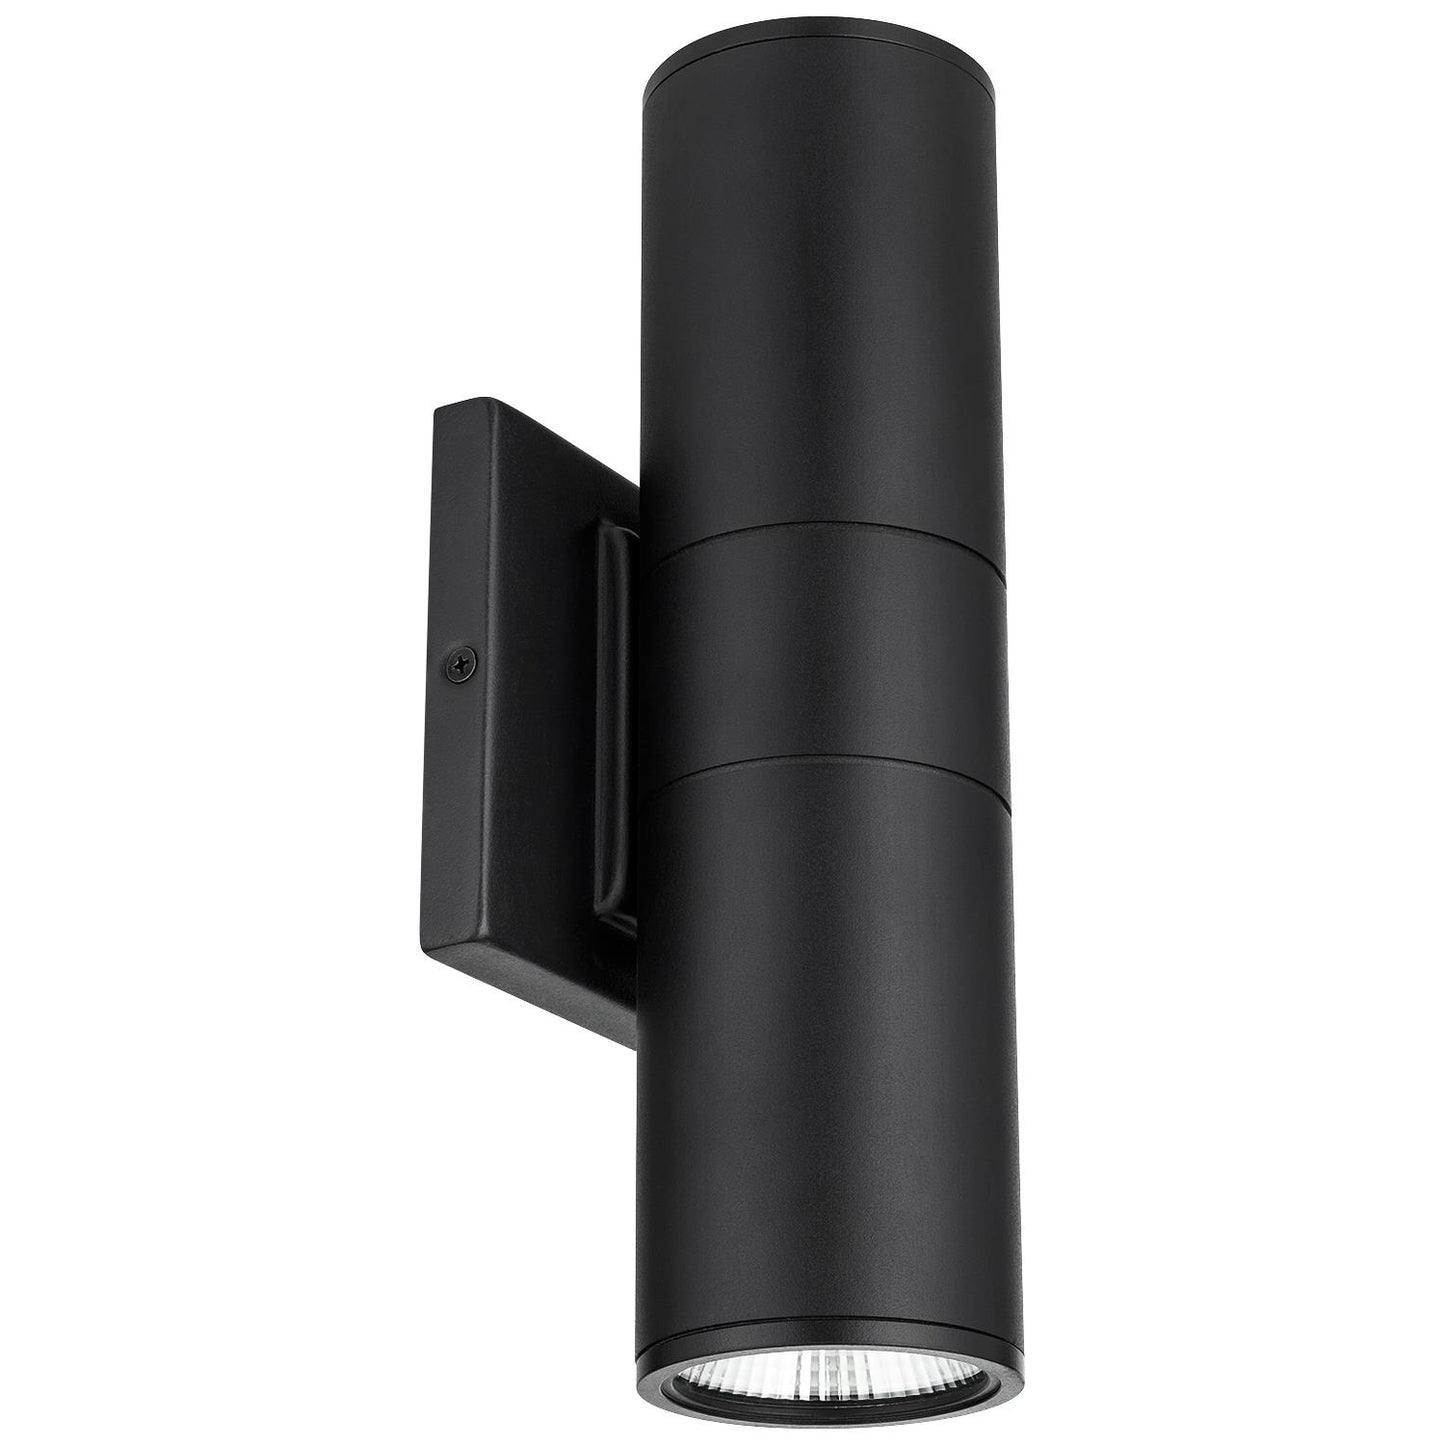 Sunlite 88132-SU LED Up and Down Outdoor Wall Light Fixture, 20 Watts, 1400 Lumens, 50,000 Hour Life Span, Black Finish, ETL Listed, Energy Star Certified, 50K - Super White